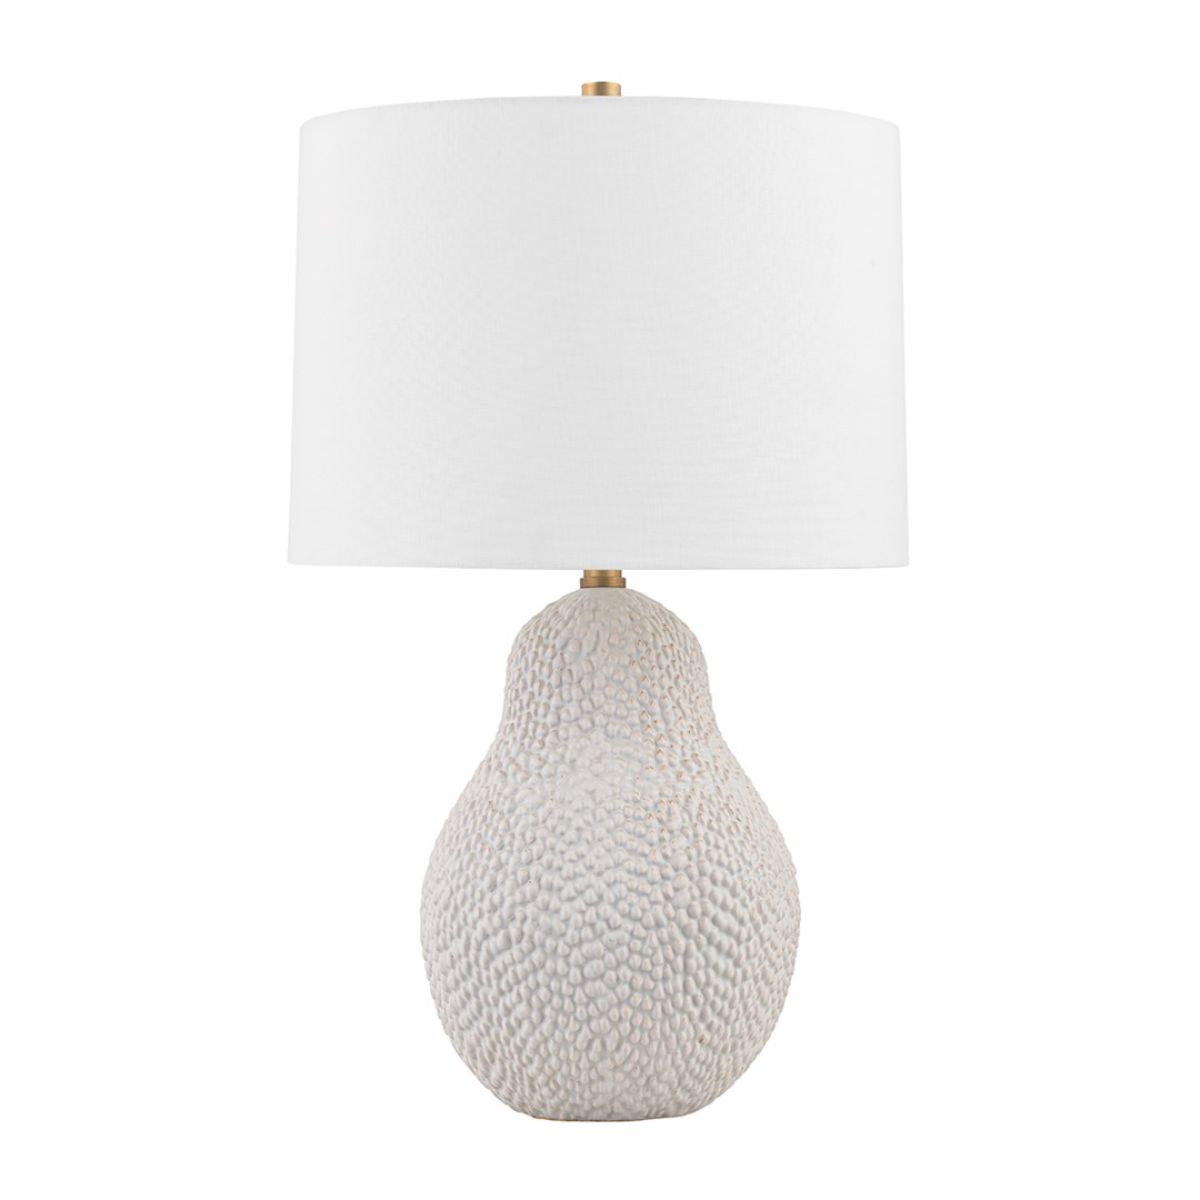 Crater Table Lamp Ceramic Satin White Gold with Patina Brass Accents